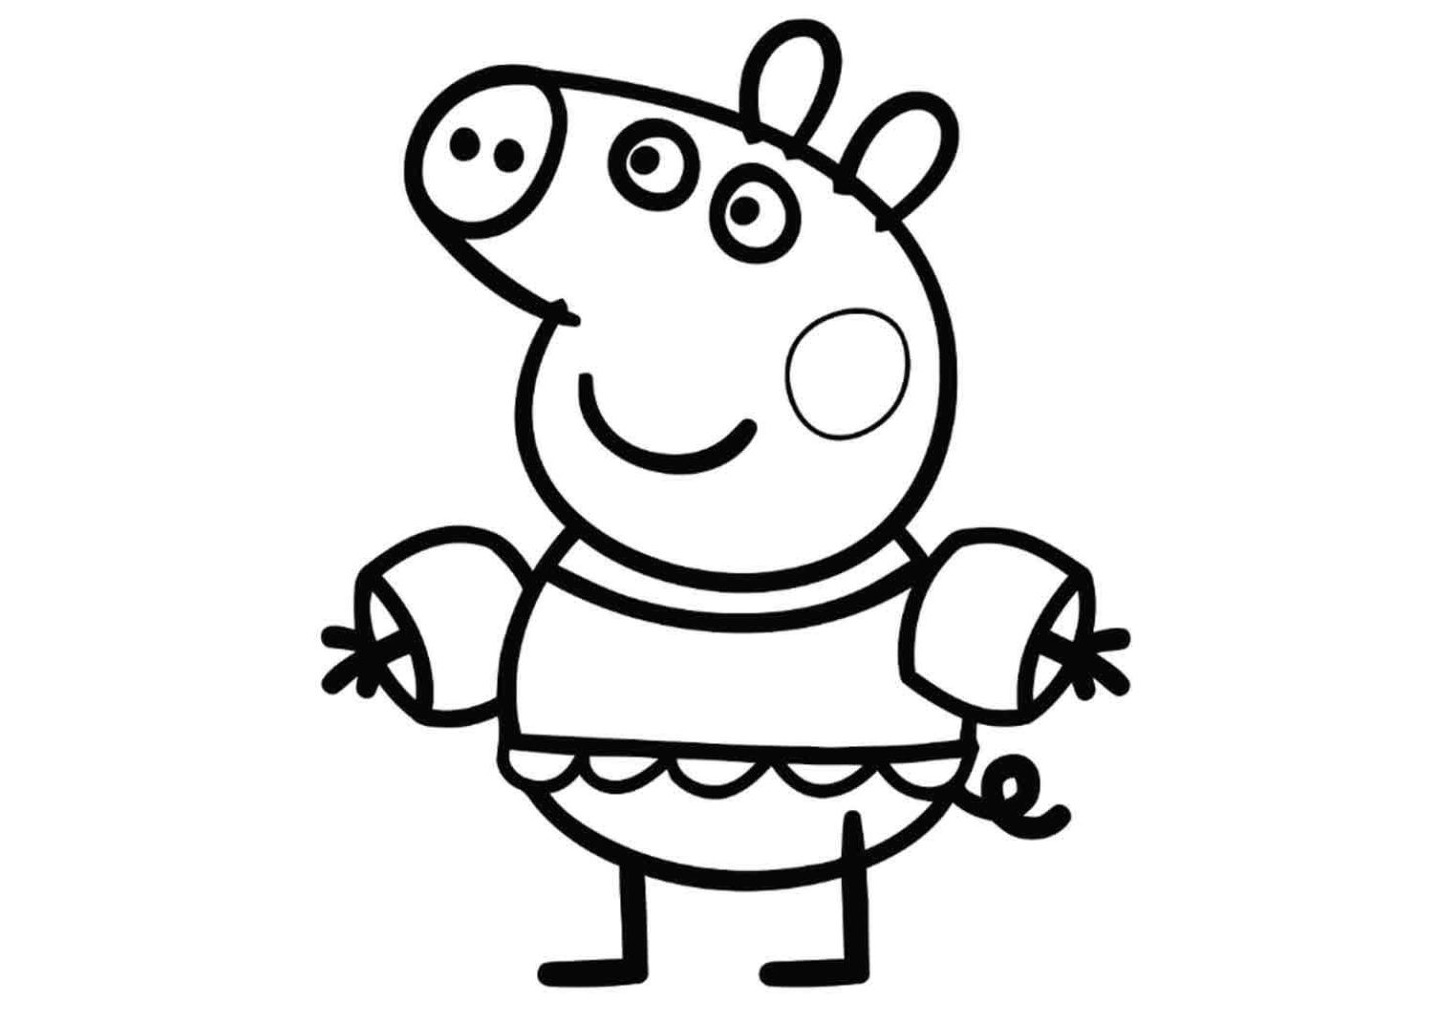 Cute Looking Peppa Pig Coloring Pages Adventures of Peppa Pig and